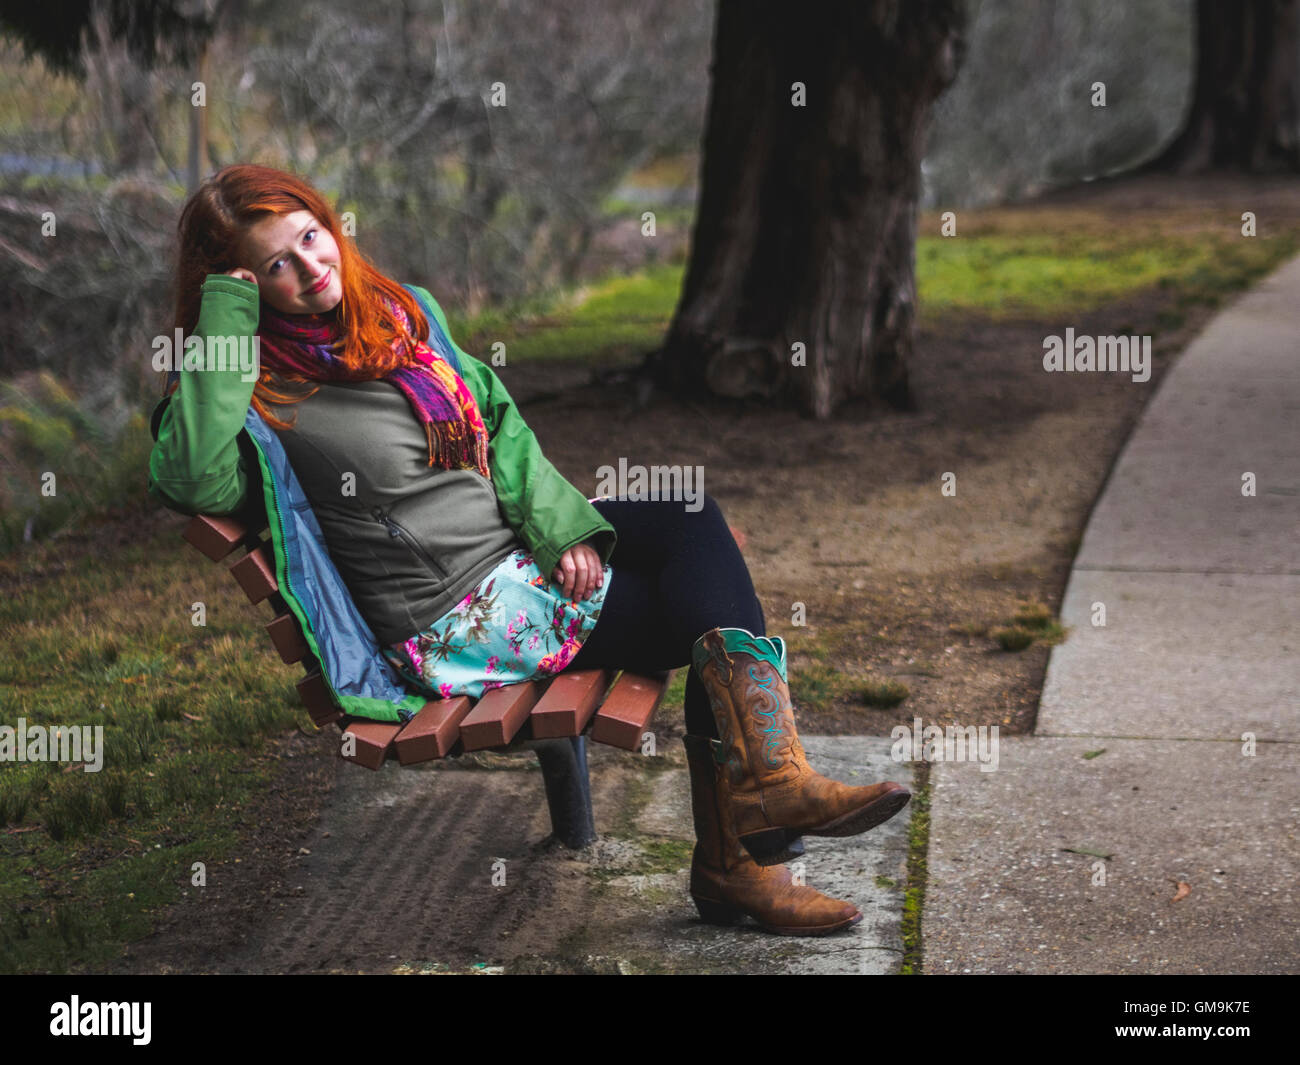 Young woman sitting on bench in park Stock Photo